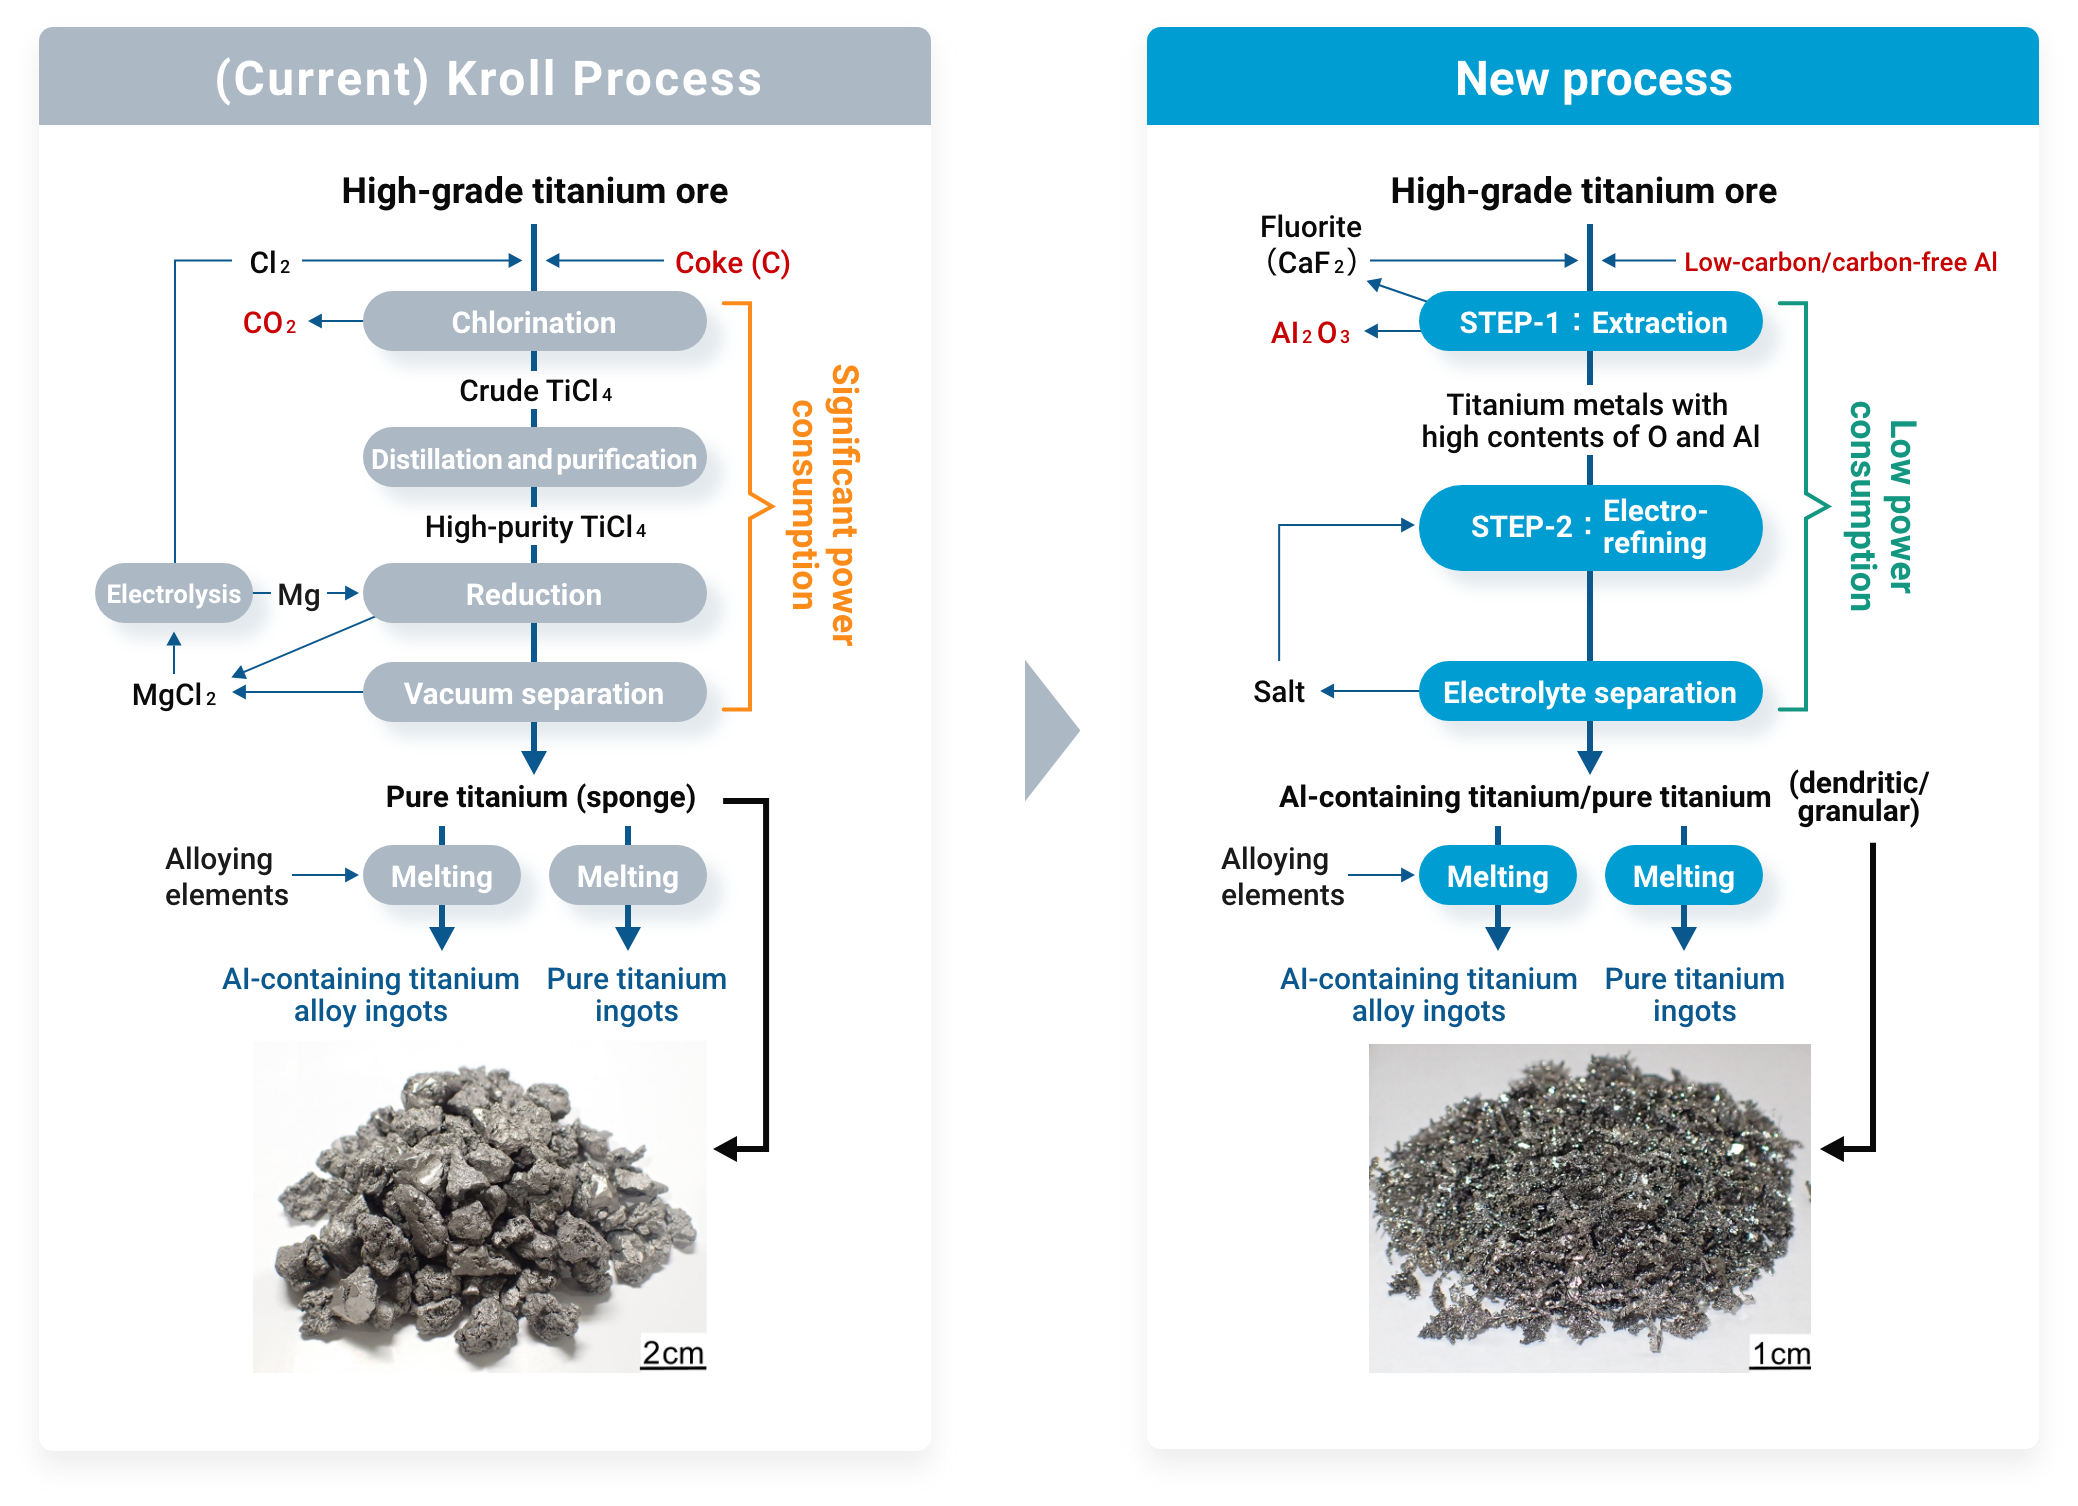 Comparison between the current (Kroll Process) and the new process